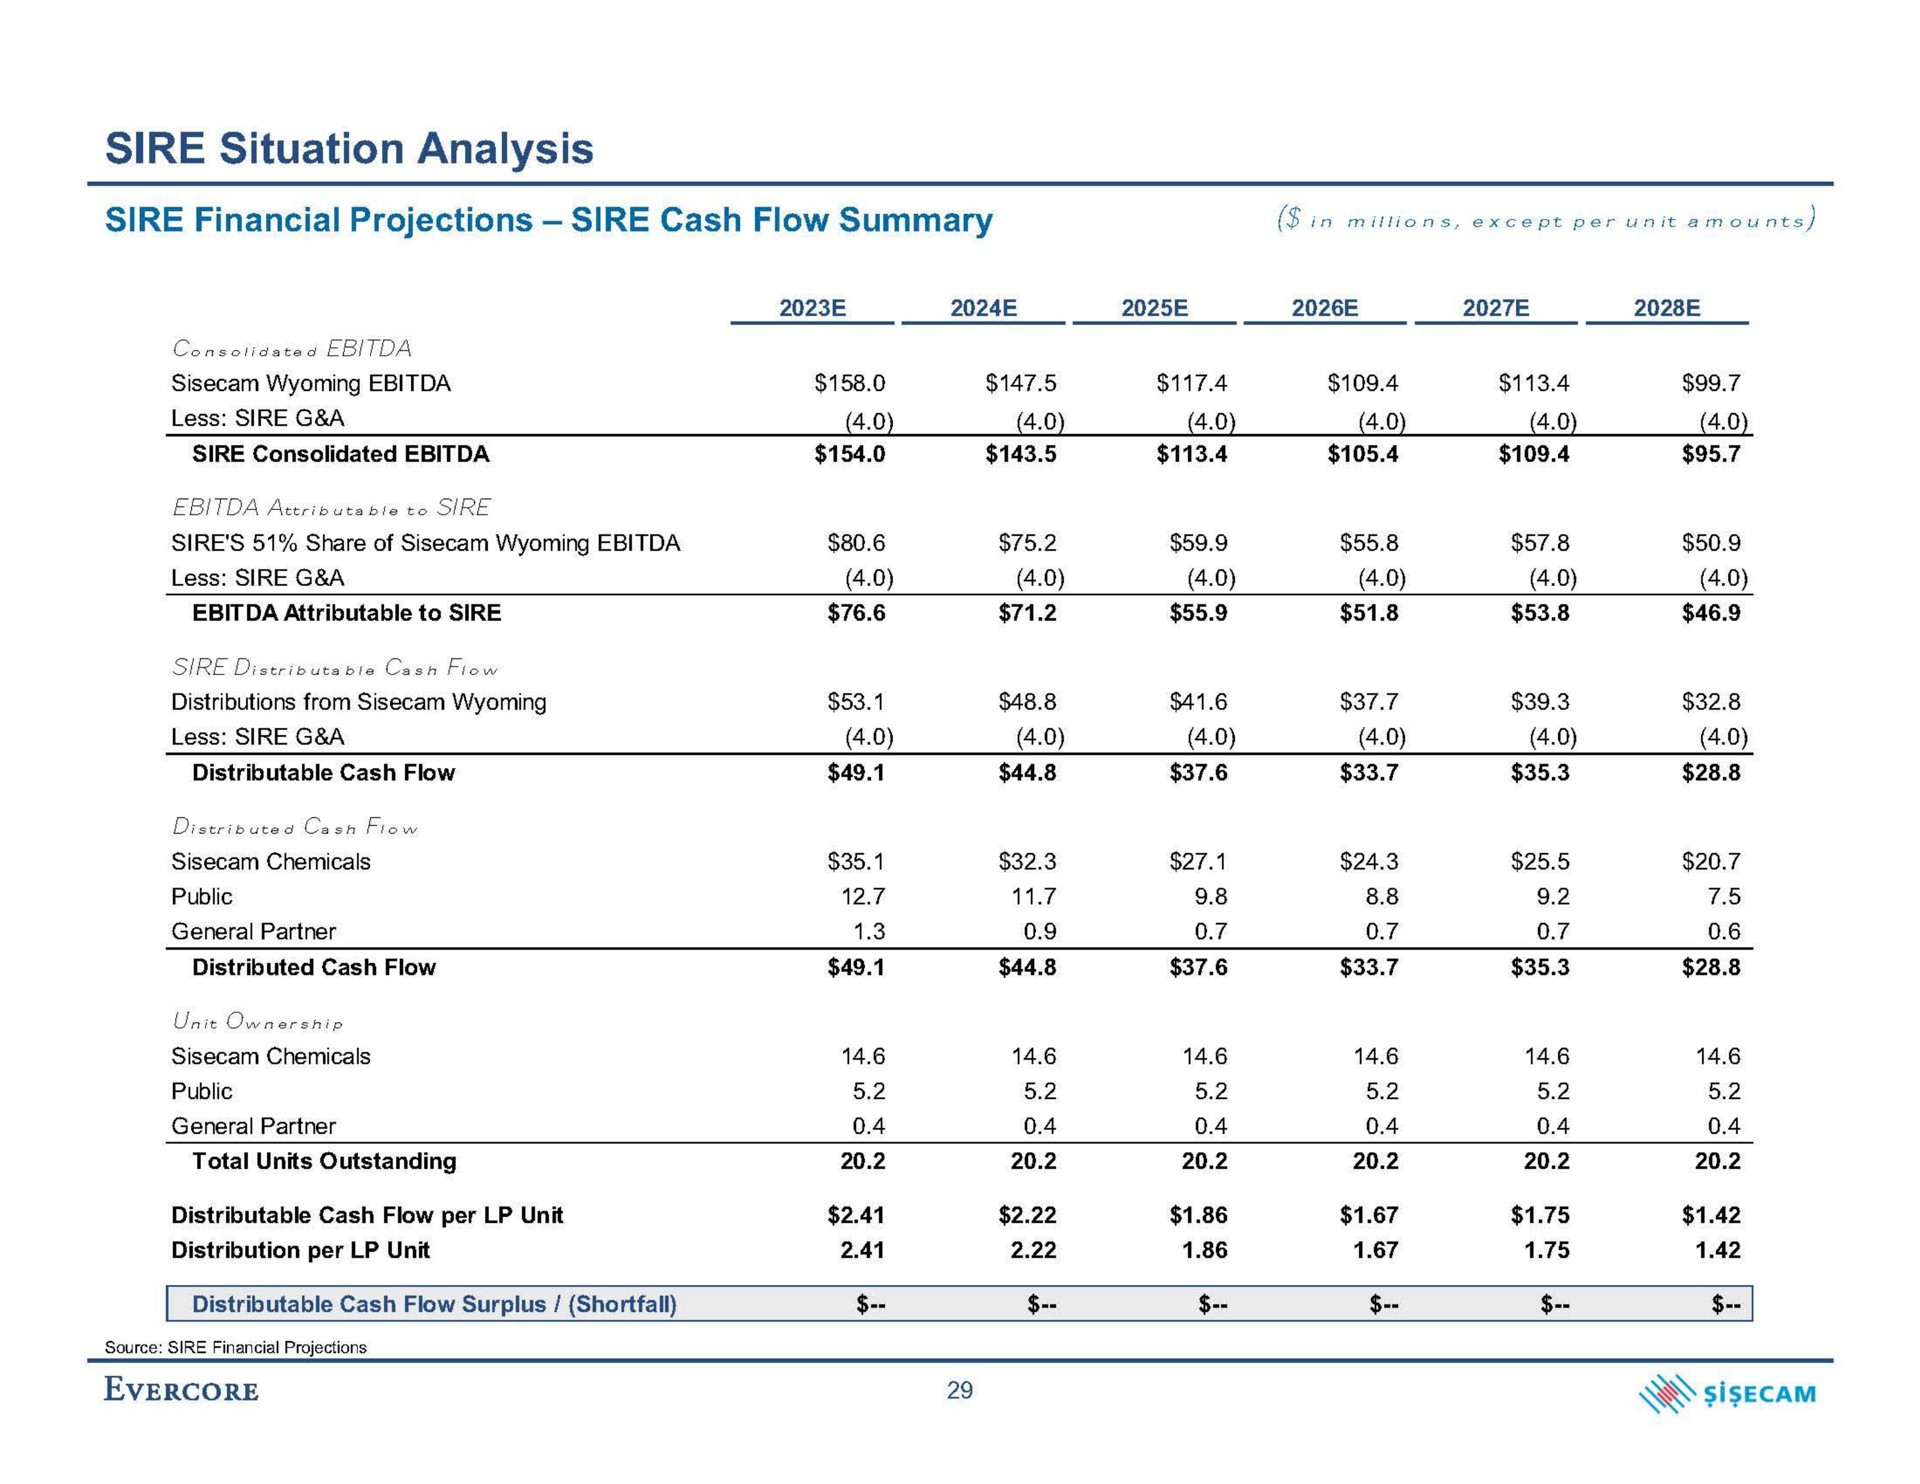 sire situation analysis sire financial projections sire cash flow summary in except per unit amounts less sire a | Evercore